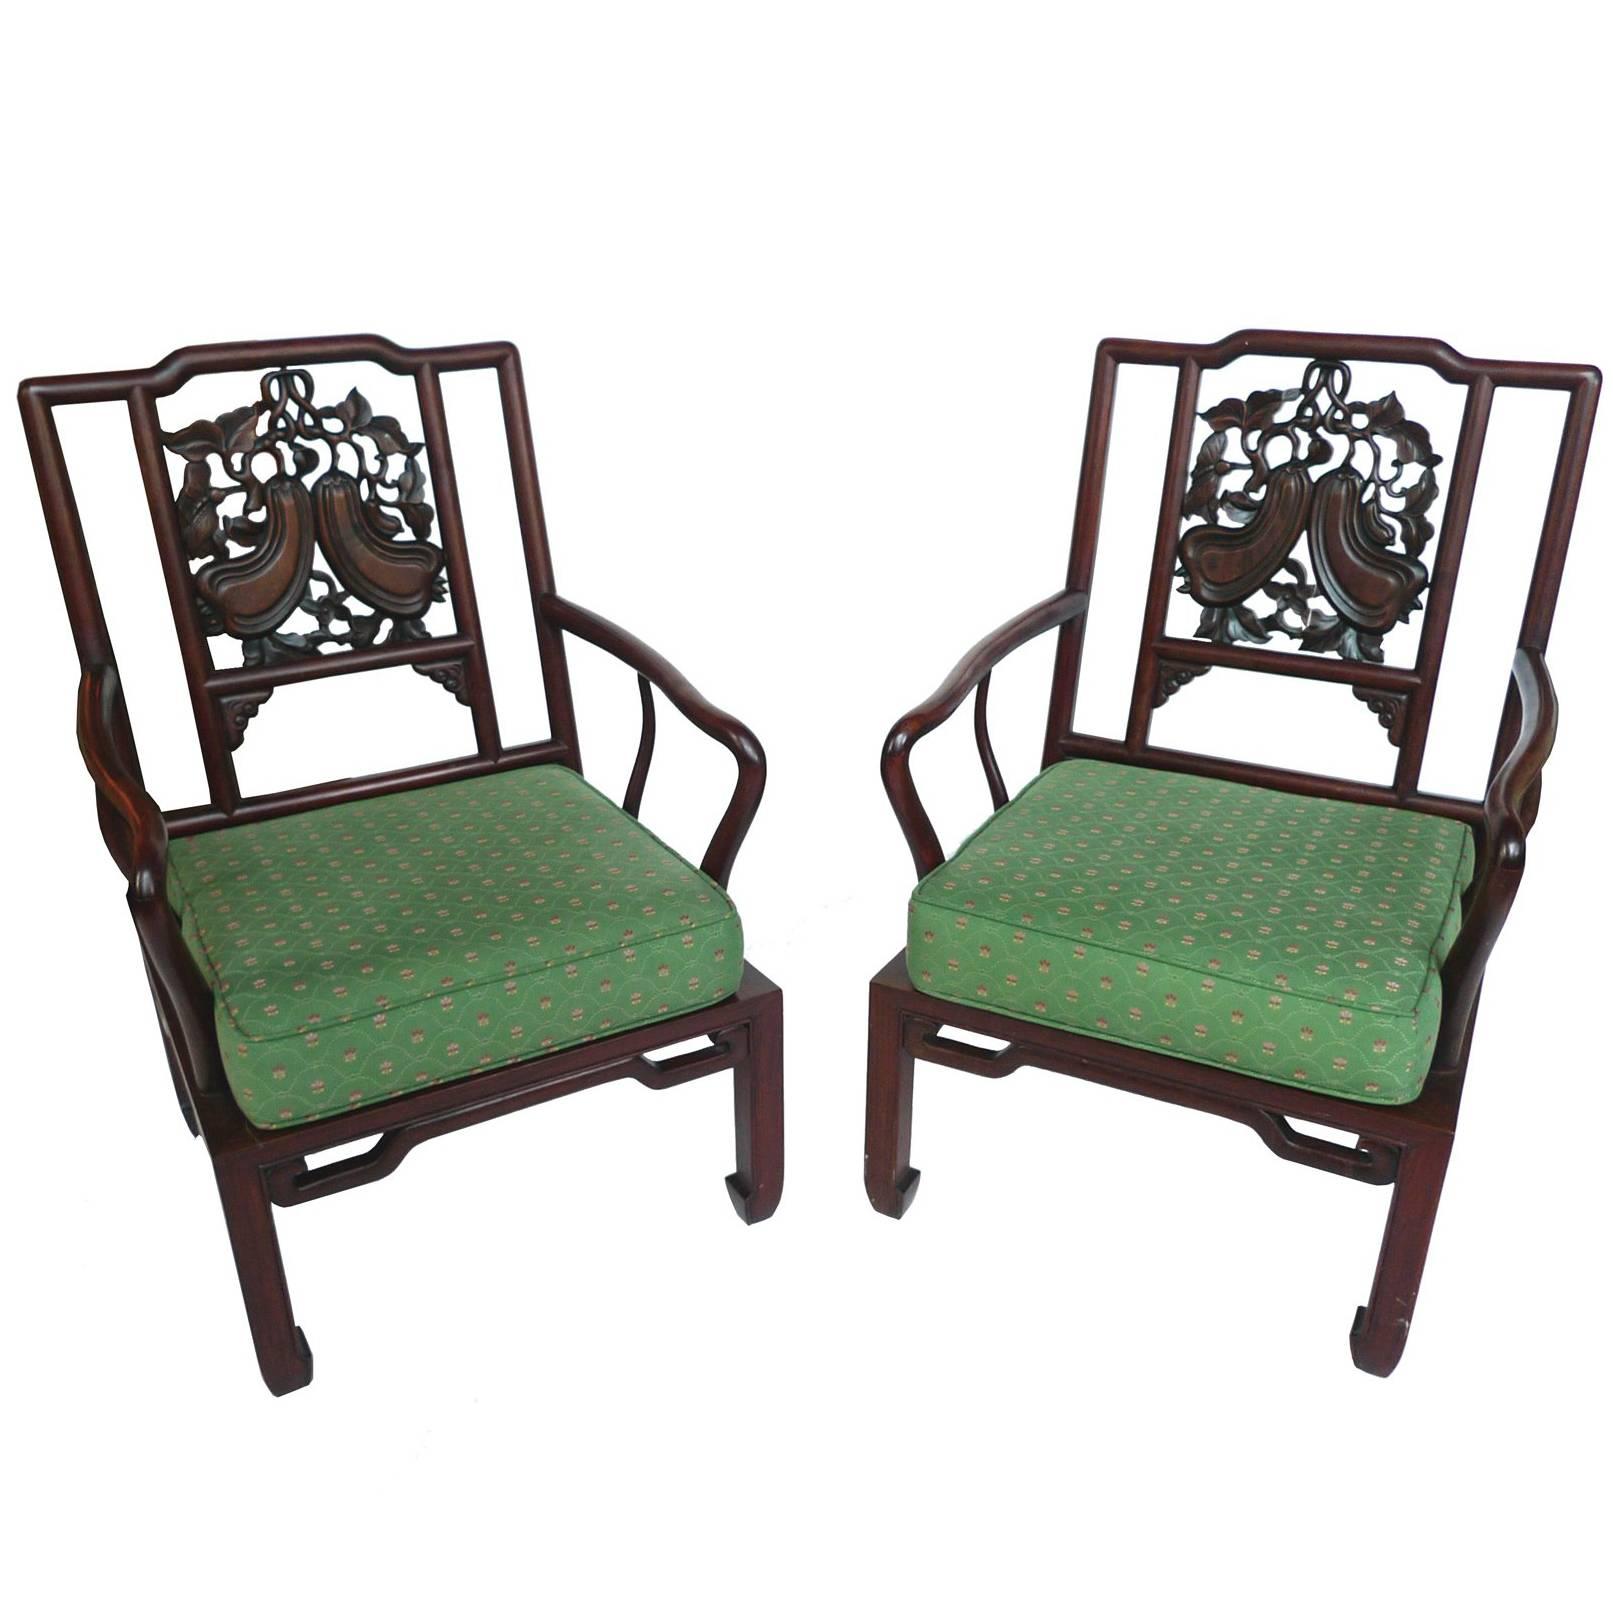 Pair of Early 20th Century Chinese Rosewood Armchairs